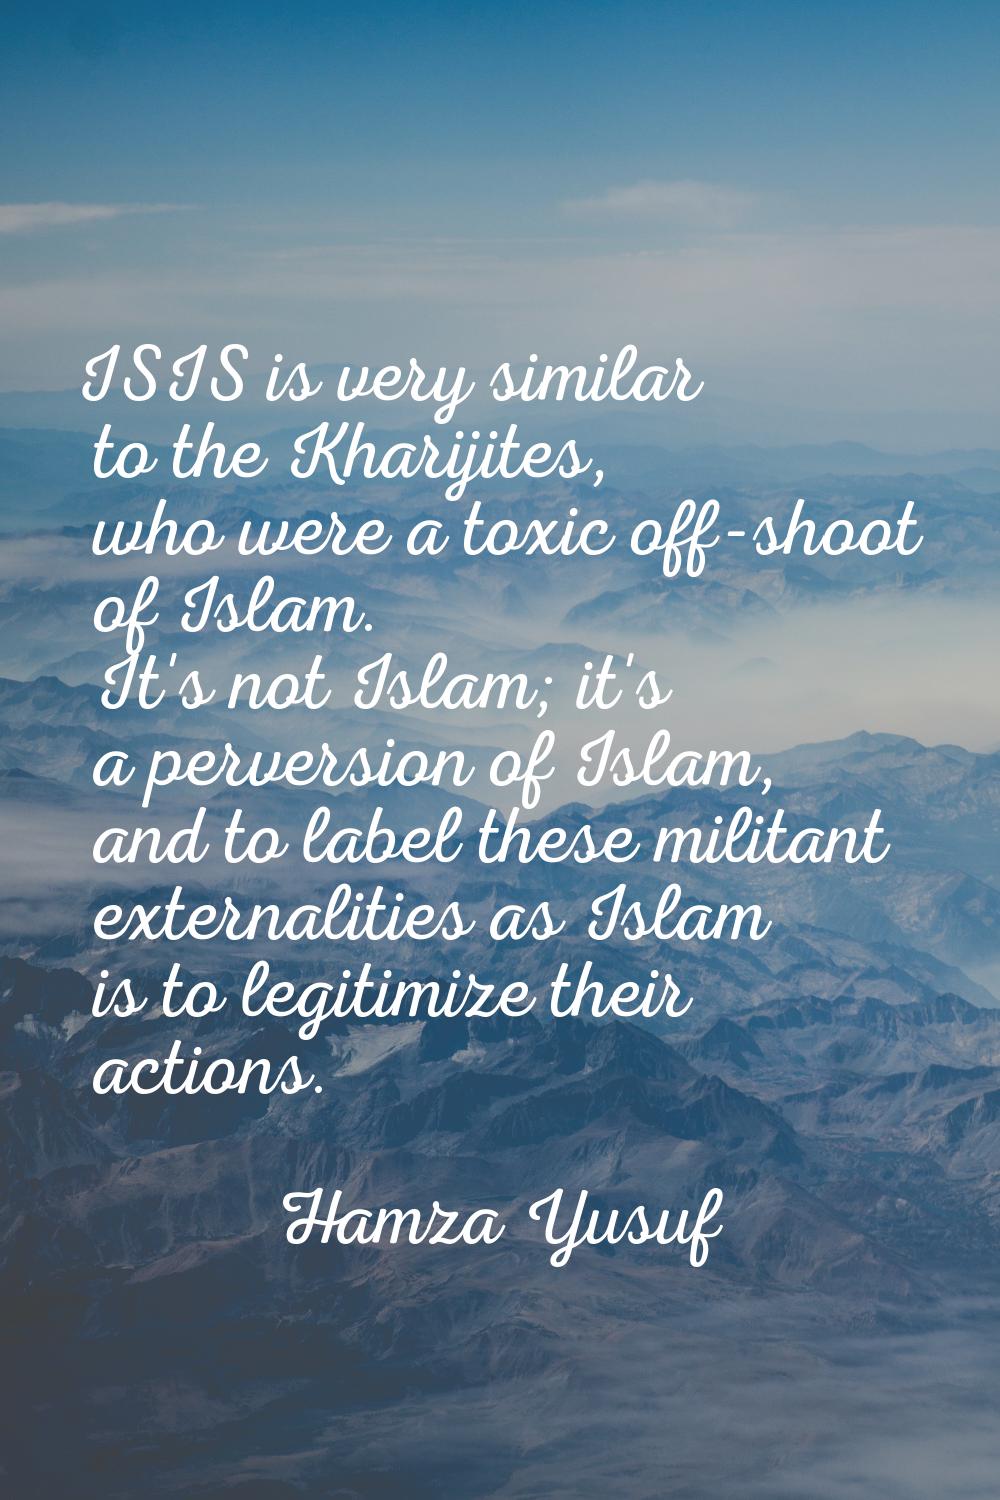 ISIS is very similar to the Kharijites, who were a toxic off-shoot of Islam. It's not Islam; it's a